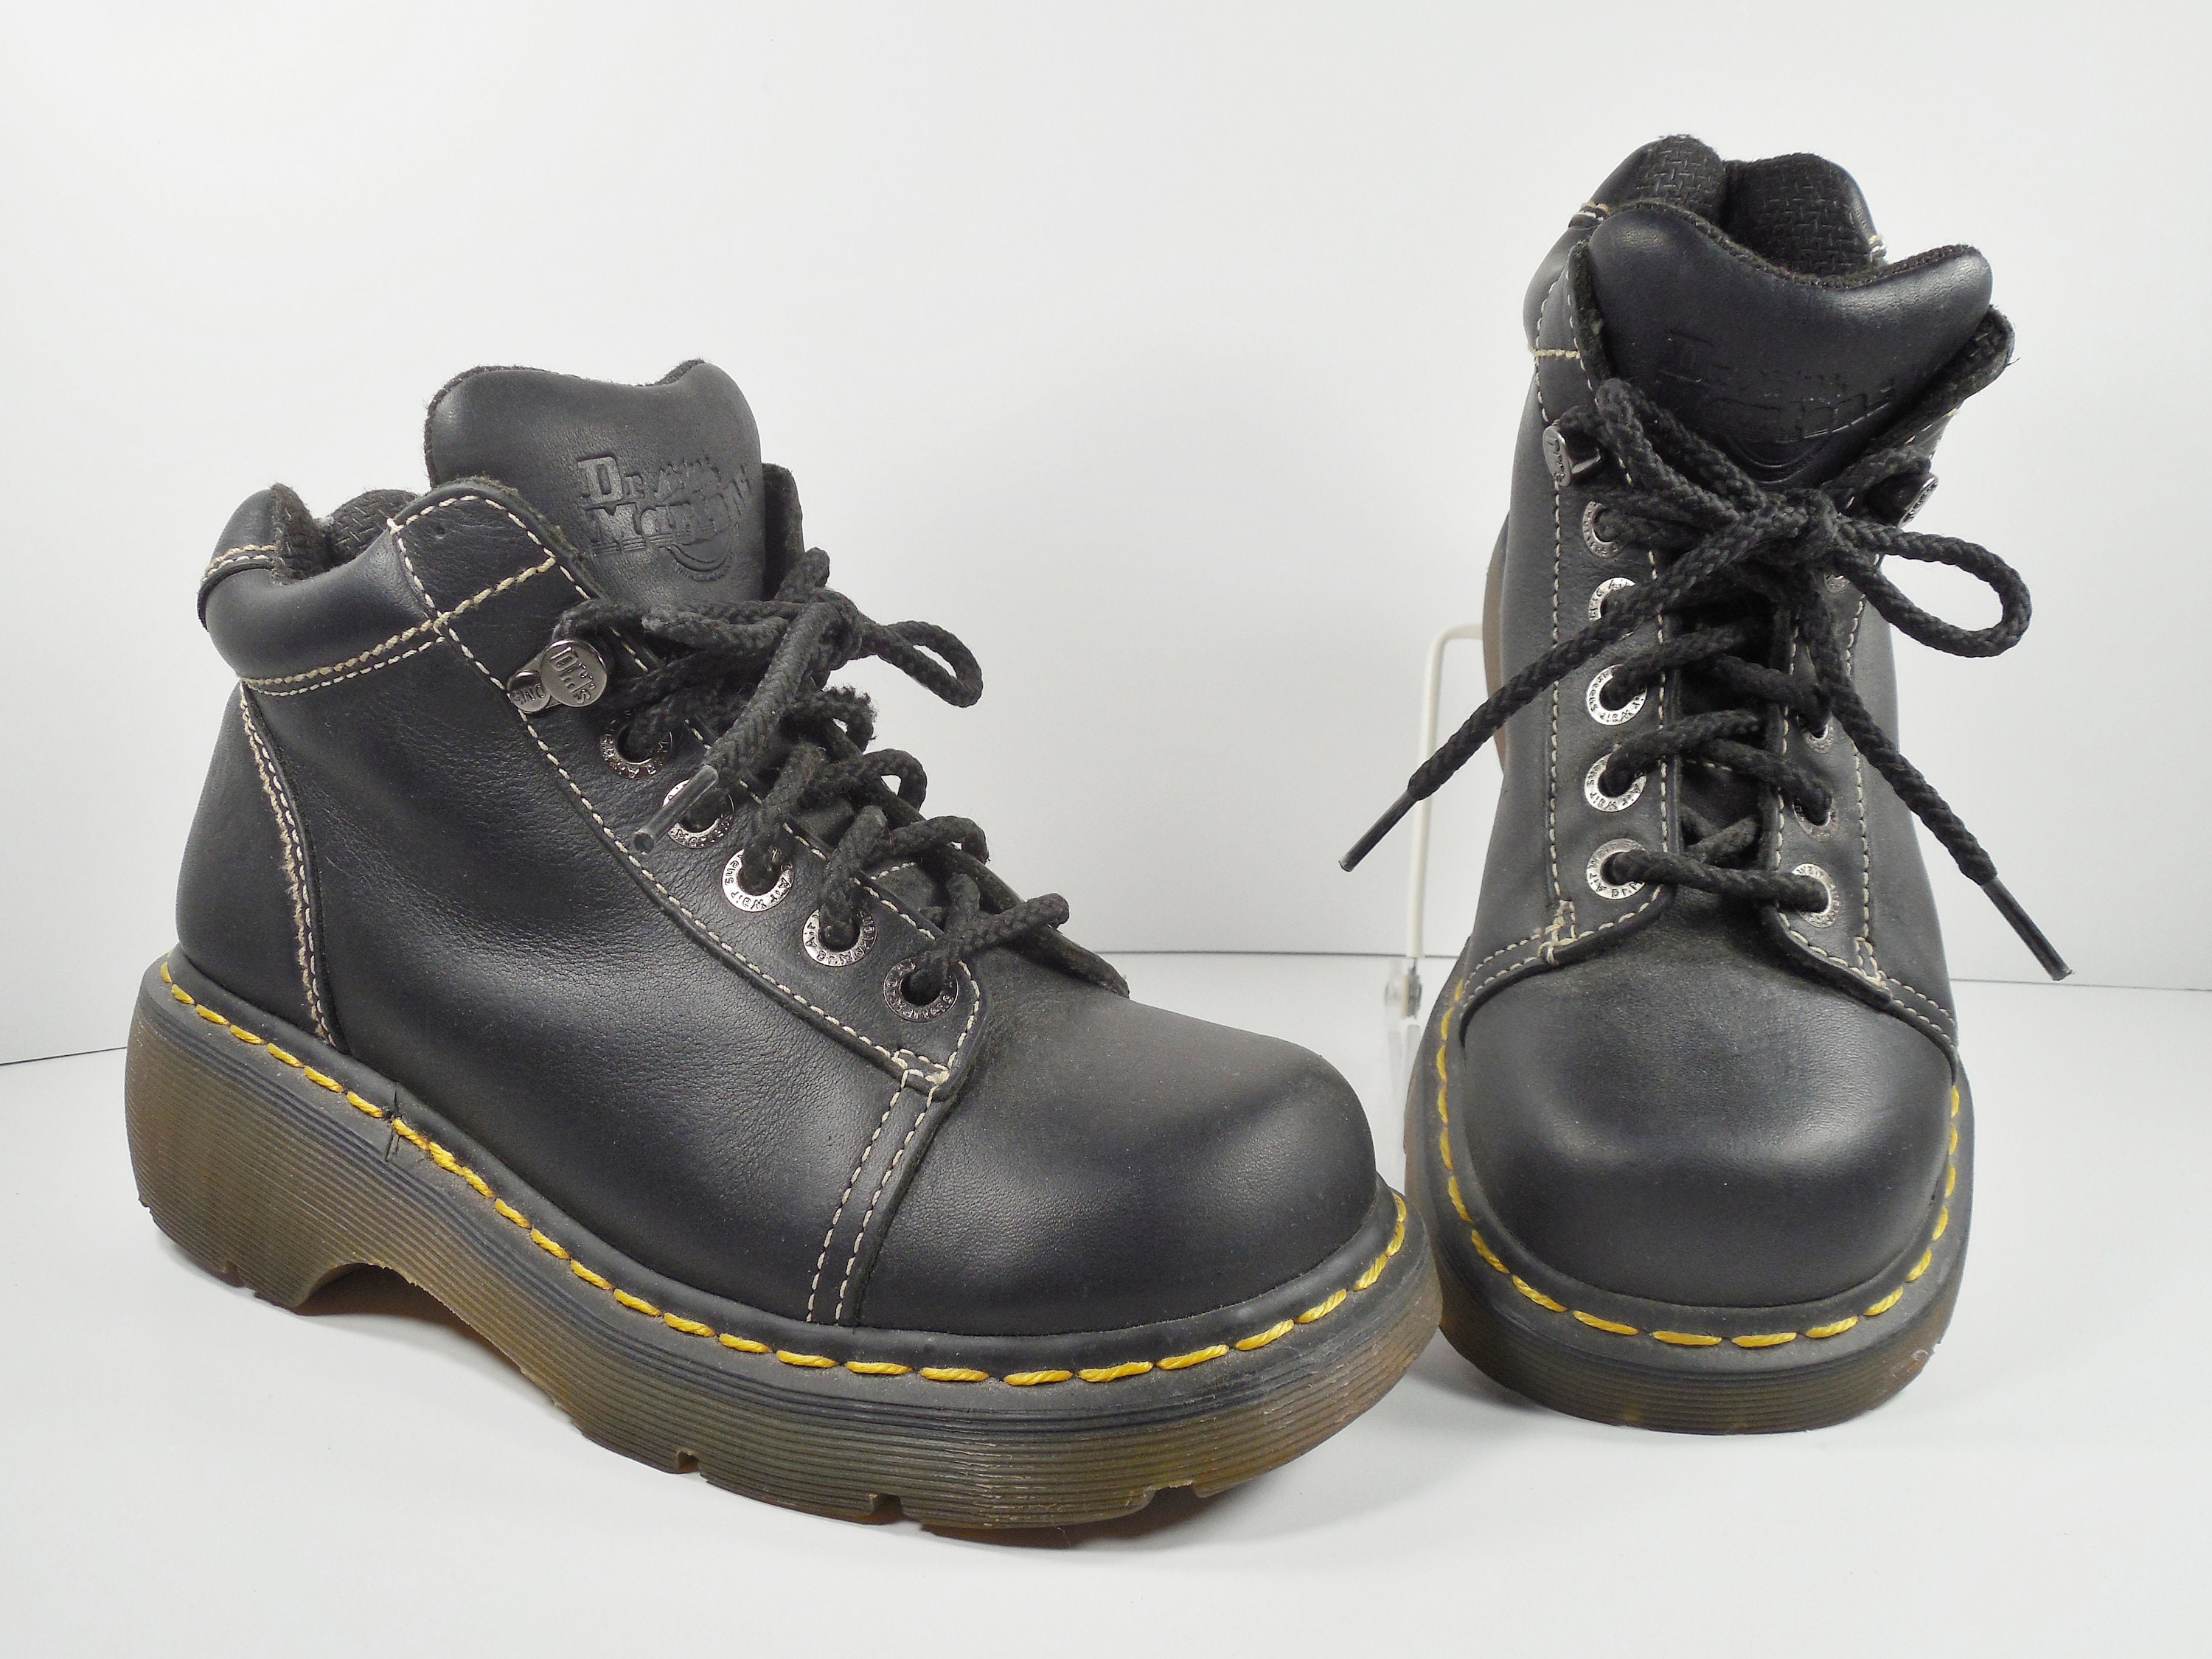 Dr. Martens 1460 Serena Boot - Women's - Free Shipping